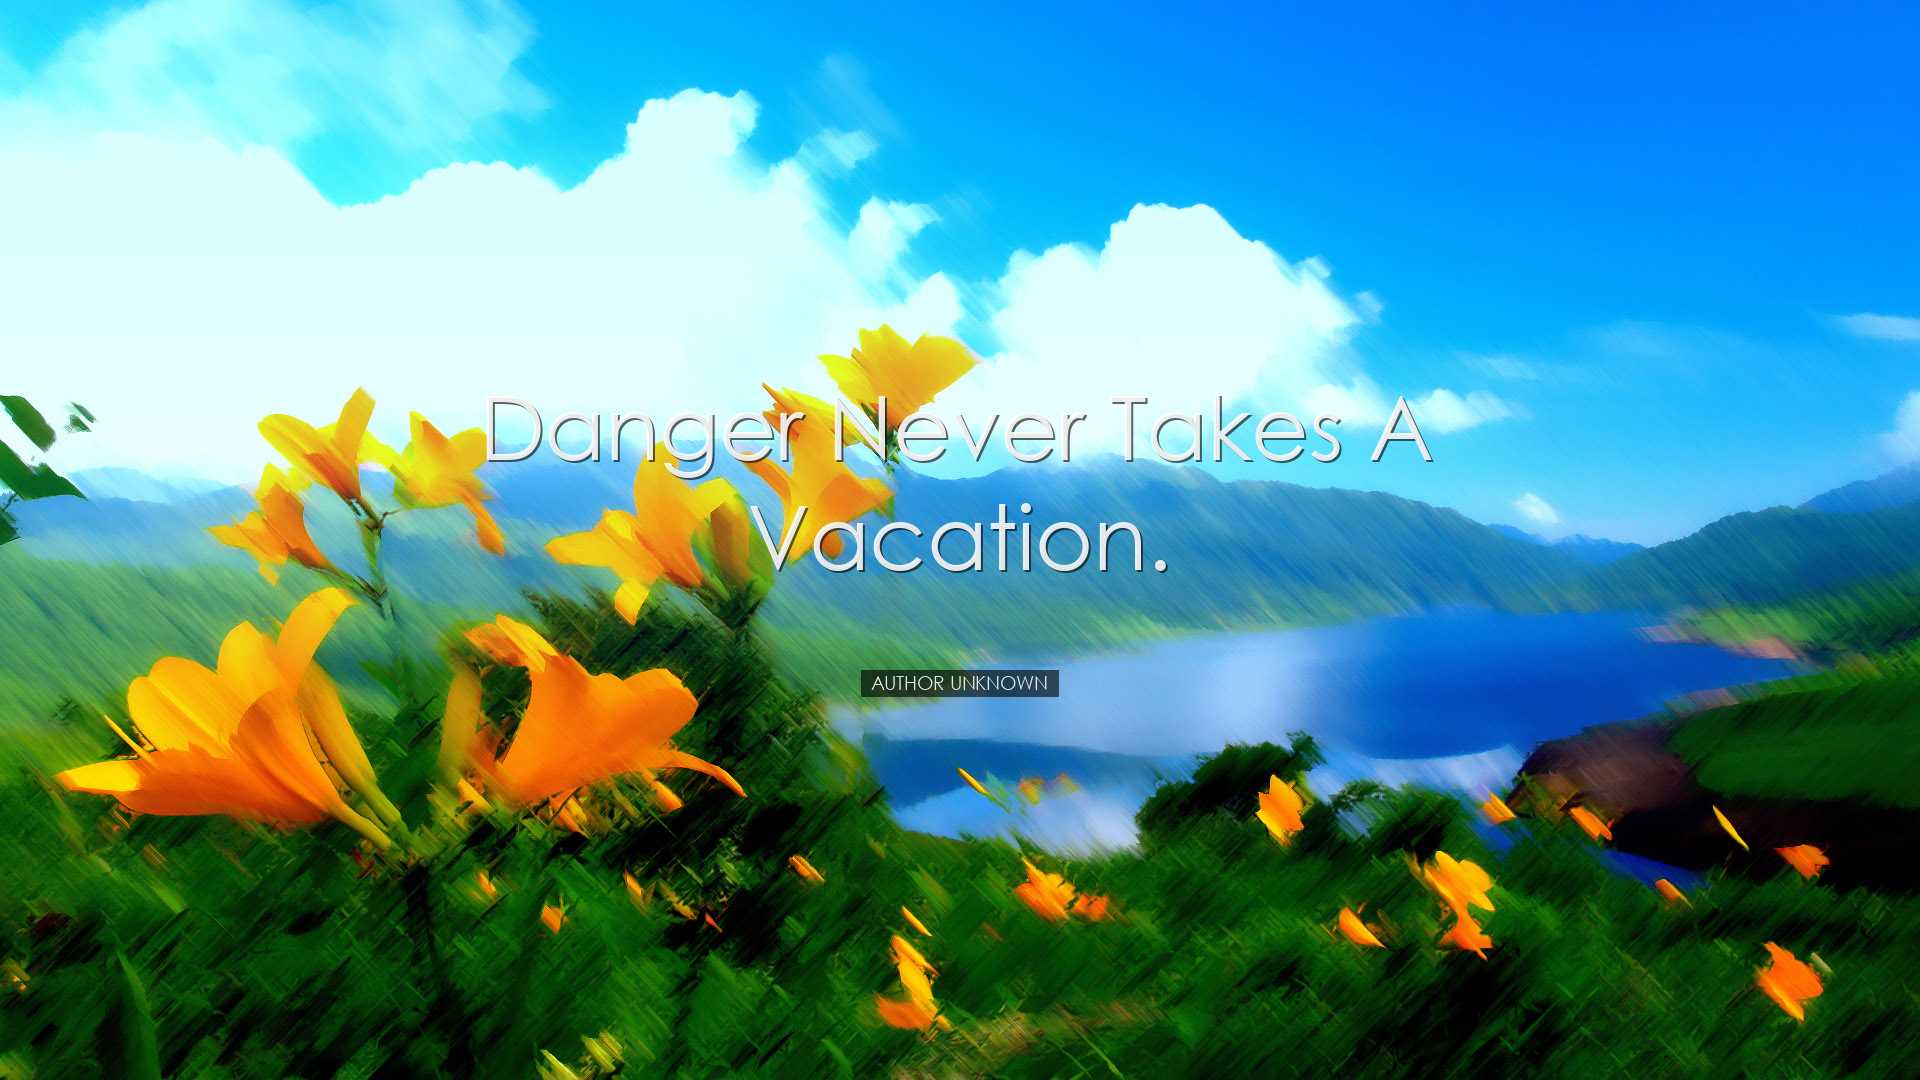 Danger never takes a vacation. - Author unknown